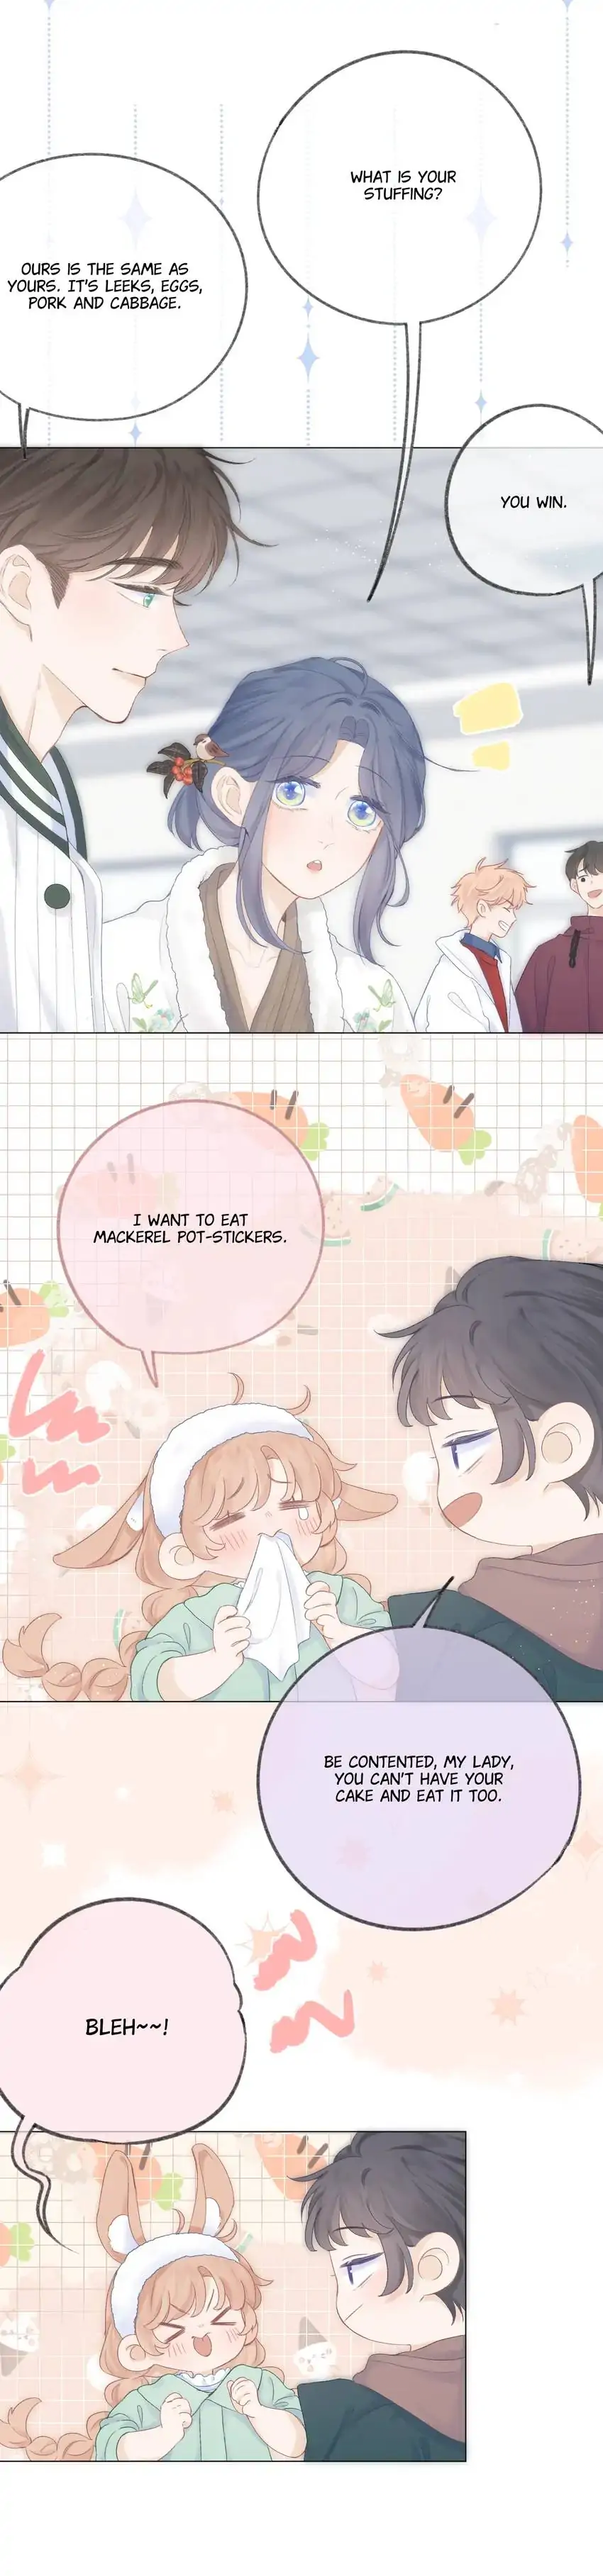 My OTP Is So Sweet That I Want To Fall In Love - chapter 60 - #2